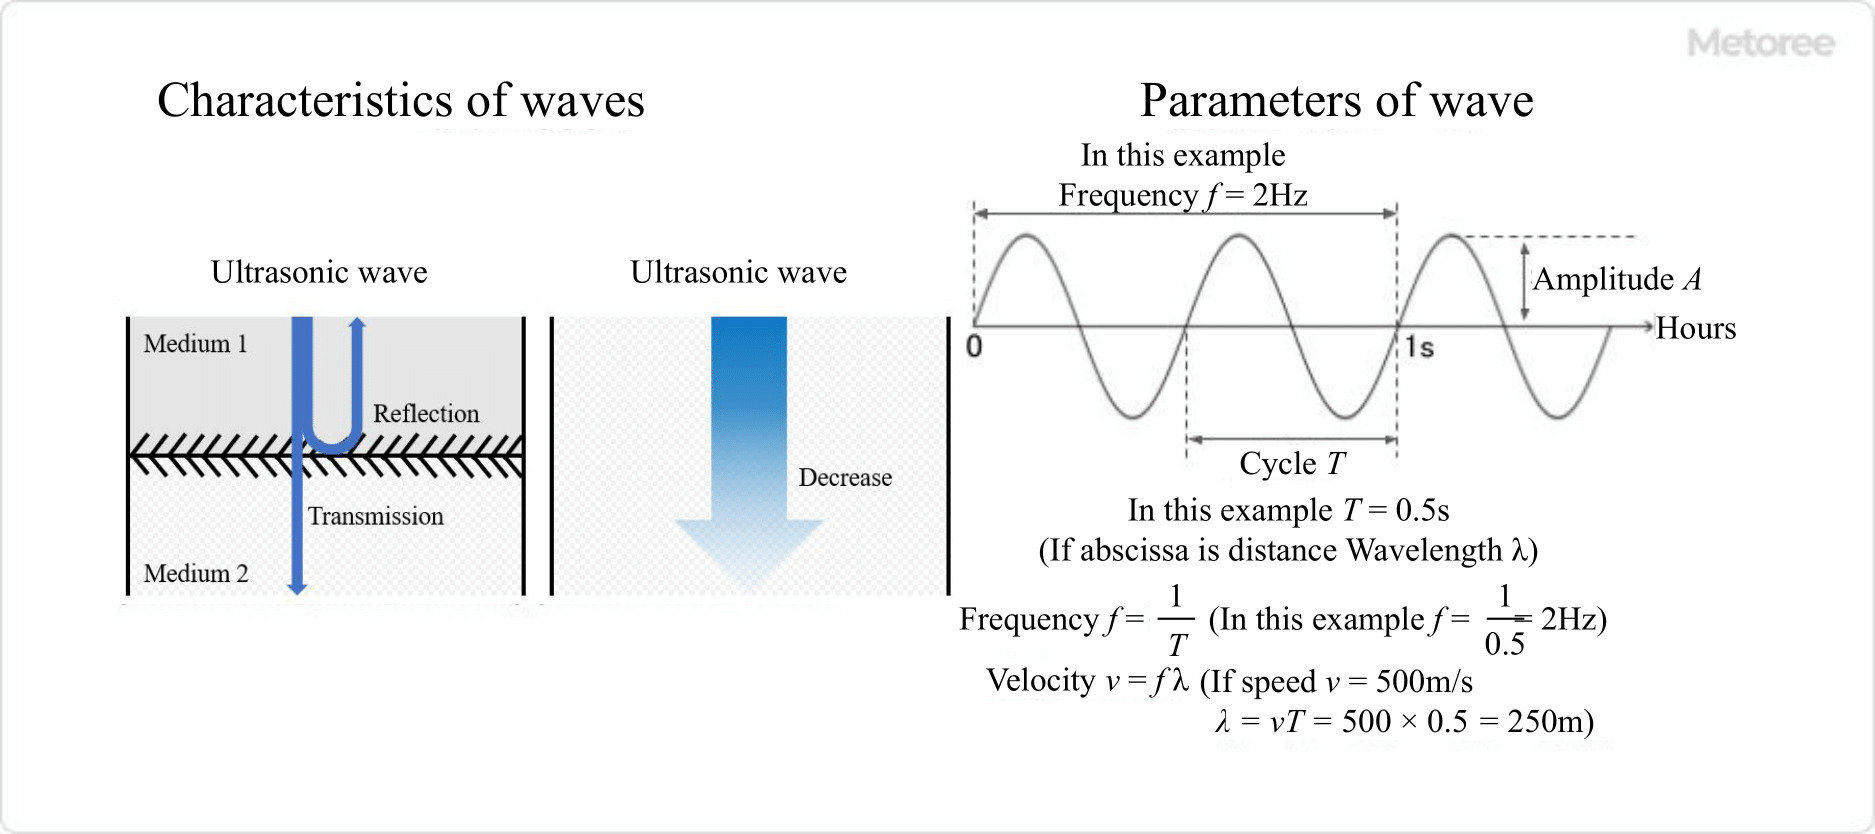 Figure 2. Wave characteristics and parameters